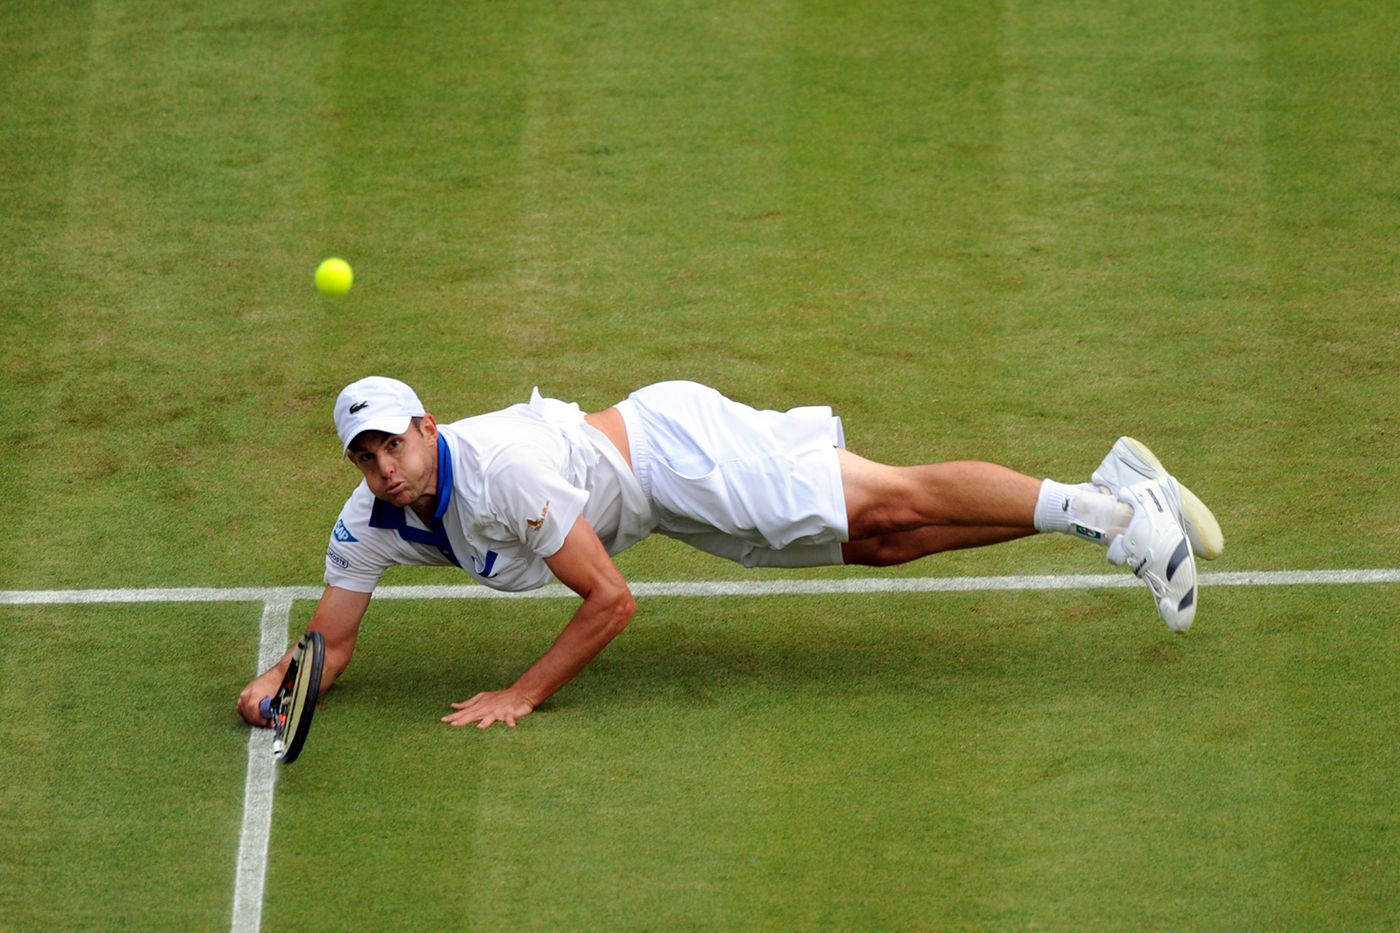 Andy Roddick Diving Into Ground Wallpaper